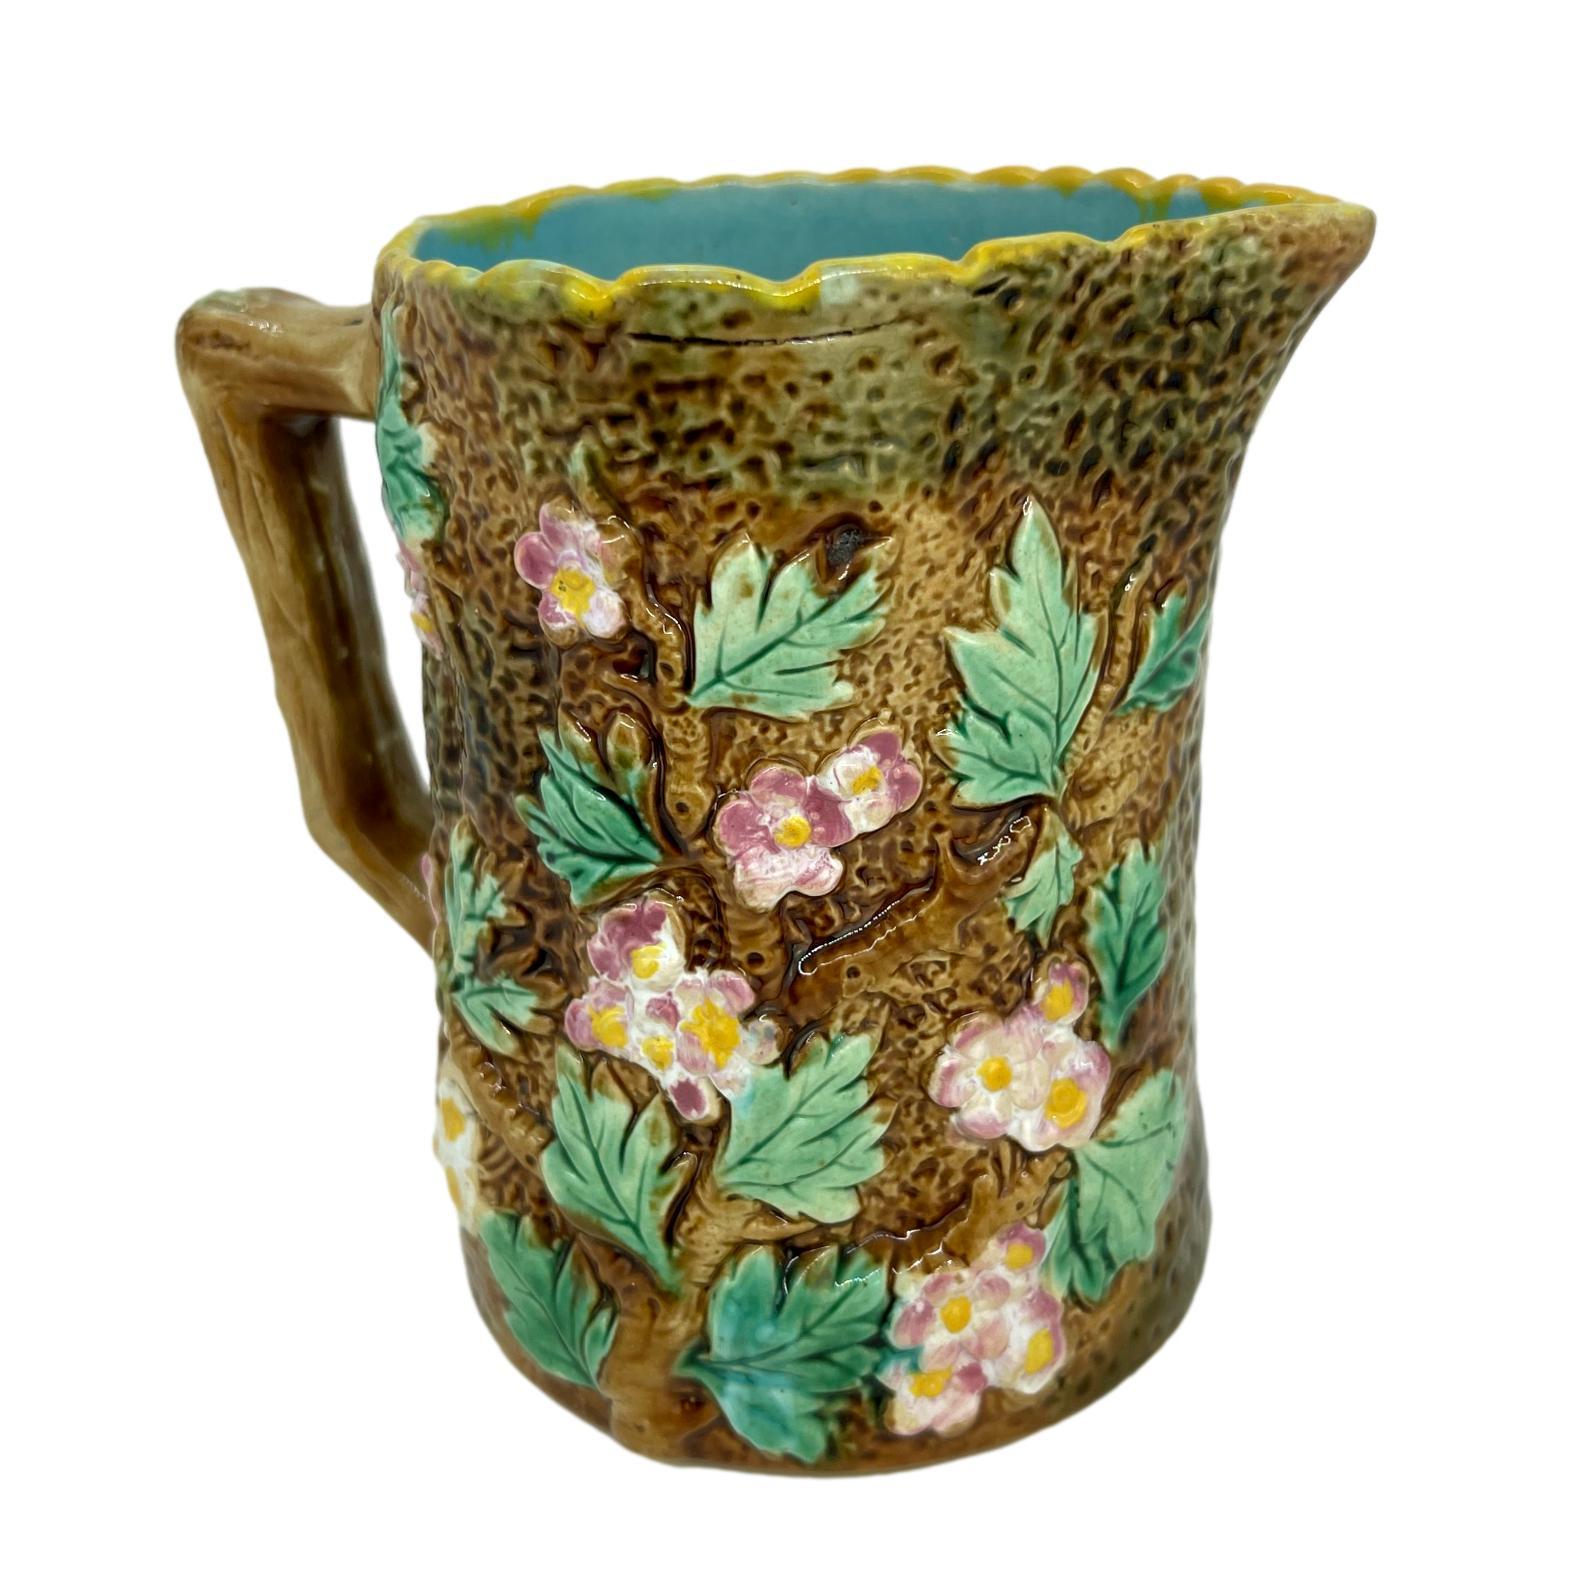 George Jones Majolica Pitcher Molded as a Hawthorn Tree, English, ca. 1875 For Sale 2